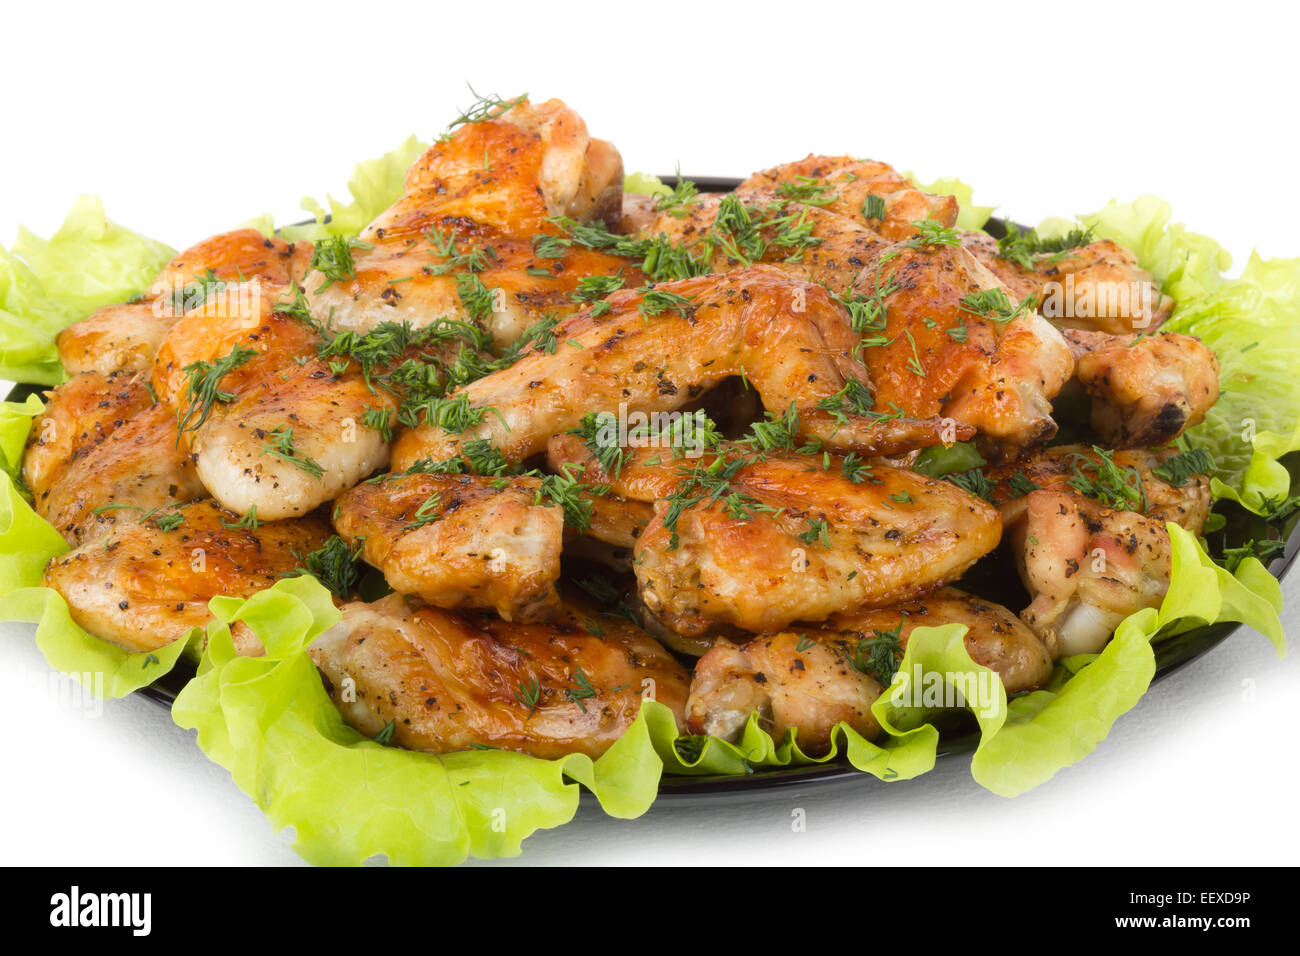 fresh tasty juicy Roasted chicken wings background Stock Photo